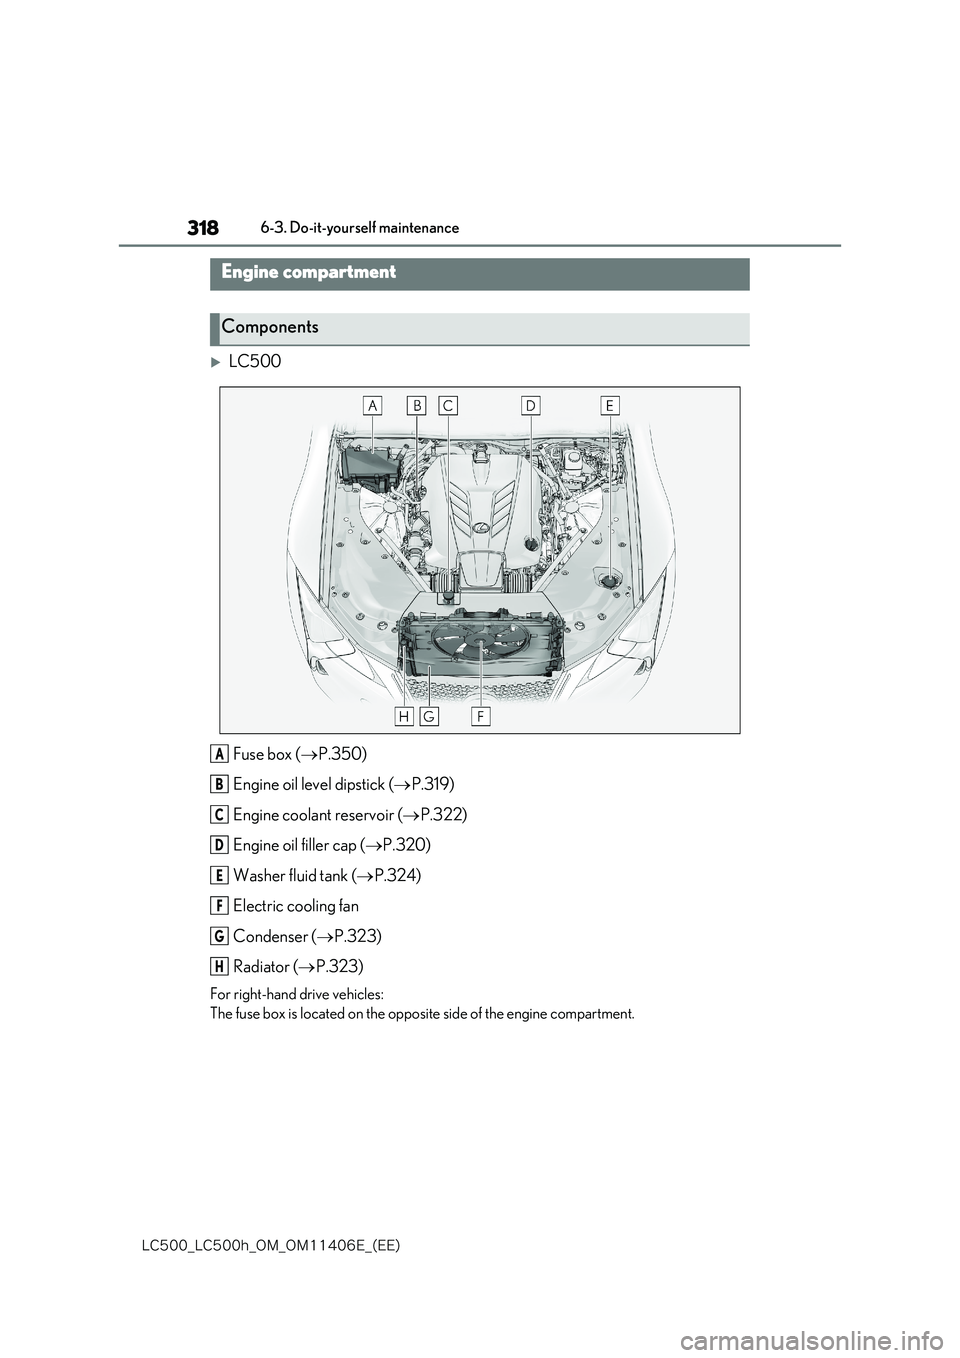 lexus LC500 2018  Owners Manual 318
�-�$����@�-�$����I�@�0�.�@�0�.������&�@�	�&�&�

6-3. Do-it-yourself maintenance
LC500 
Fuse box ( P.350) 
Engine oil level dipstick ( P.319) 
Engine coolant reservoir ( P.32